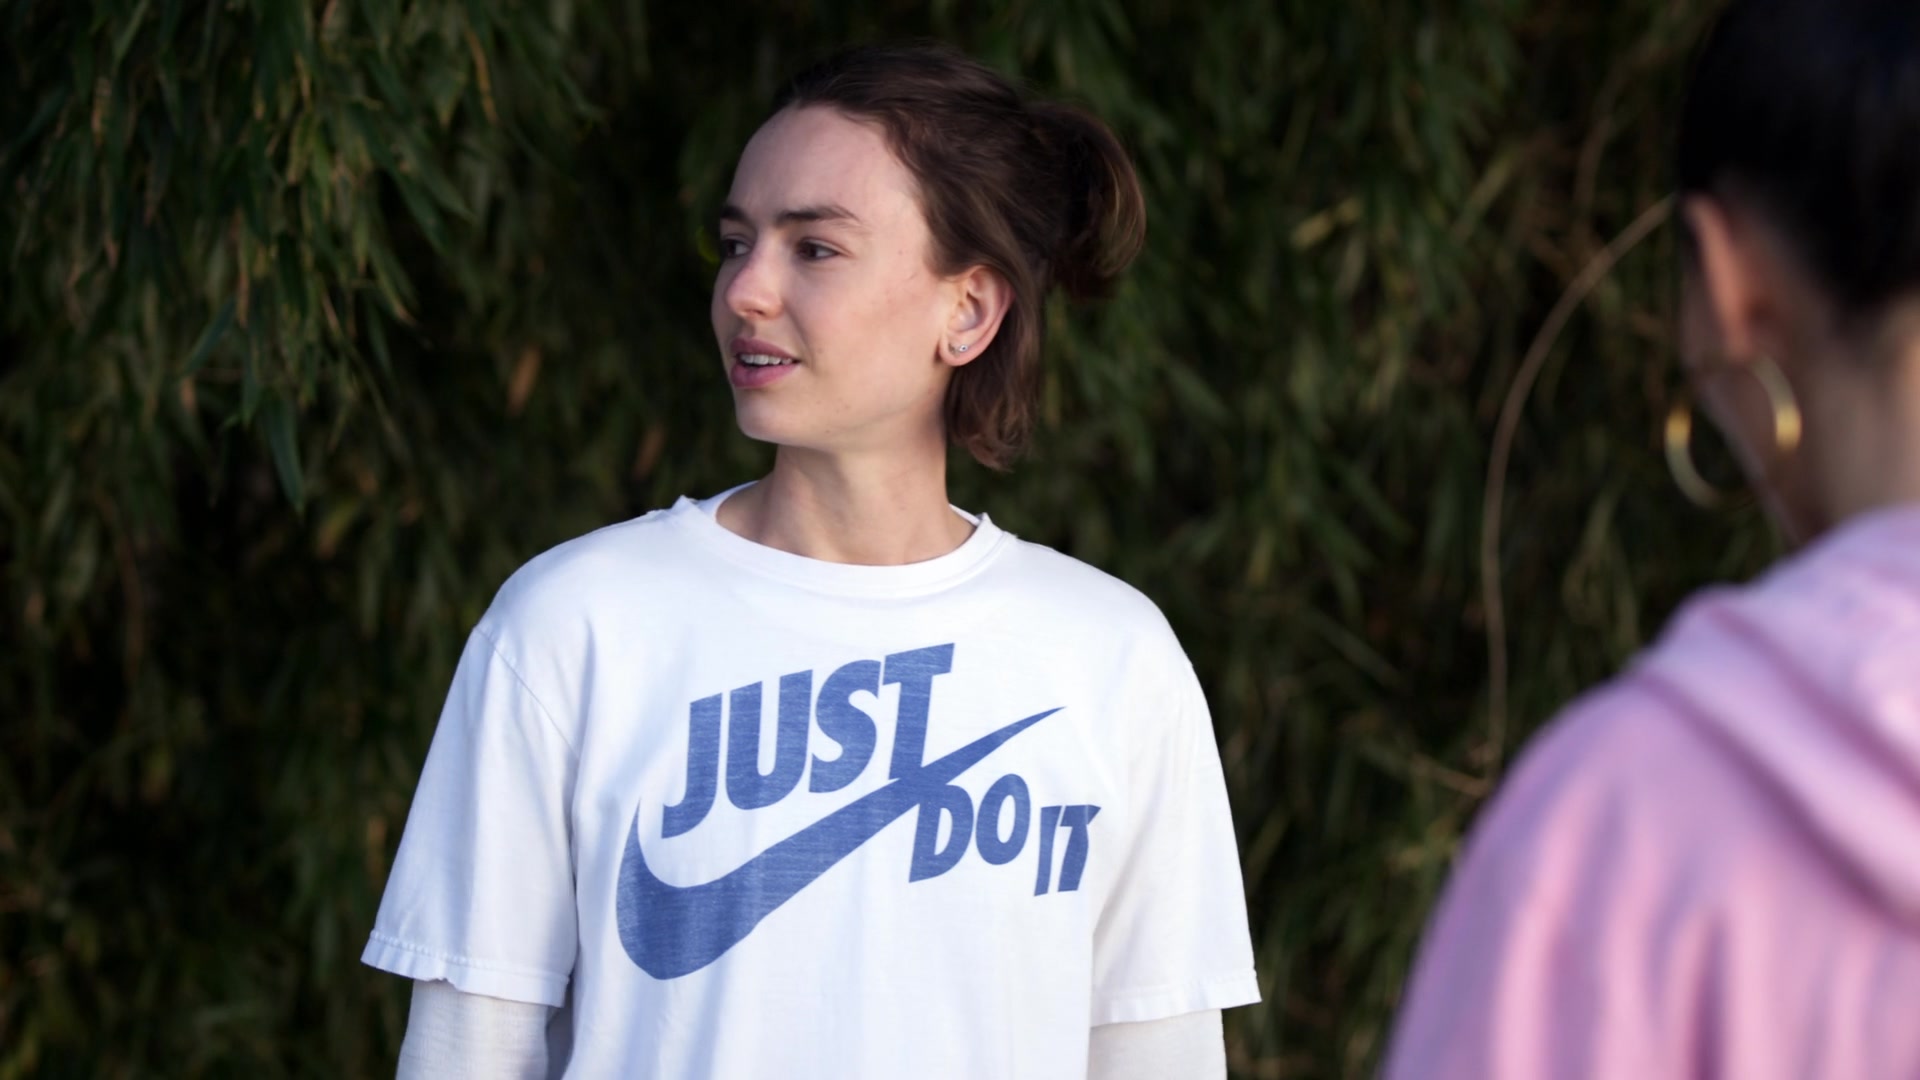 Nike Women's Do It' Print White T-Shirt Of Brigette Lundy-Paine As Gardner In Atypical S04E05 "Dead Dreams" (2021)